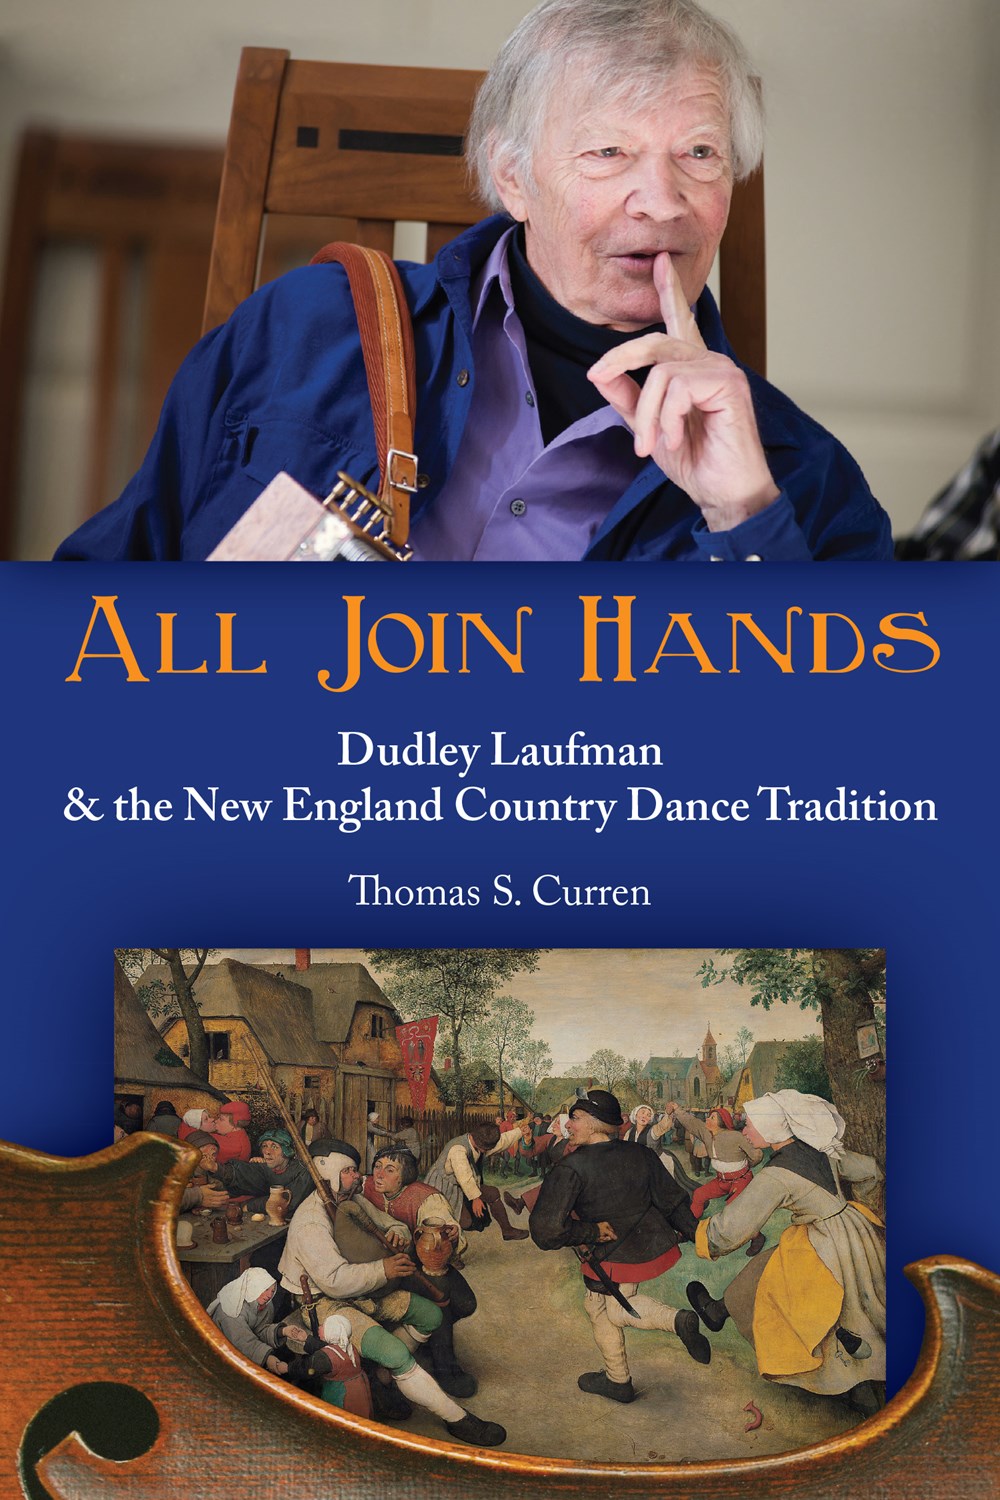 All Join Hands: Dudley Laufman & the New England Country Dance Tradition